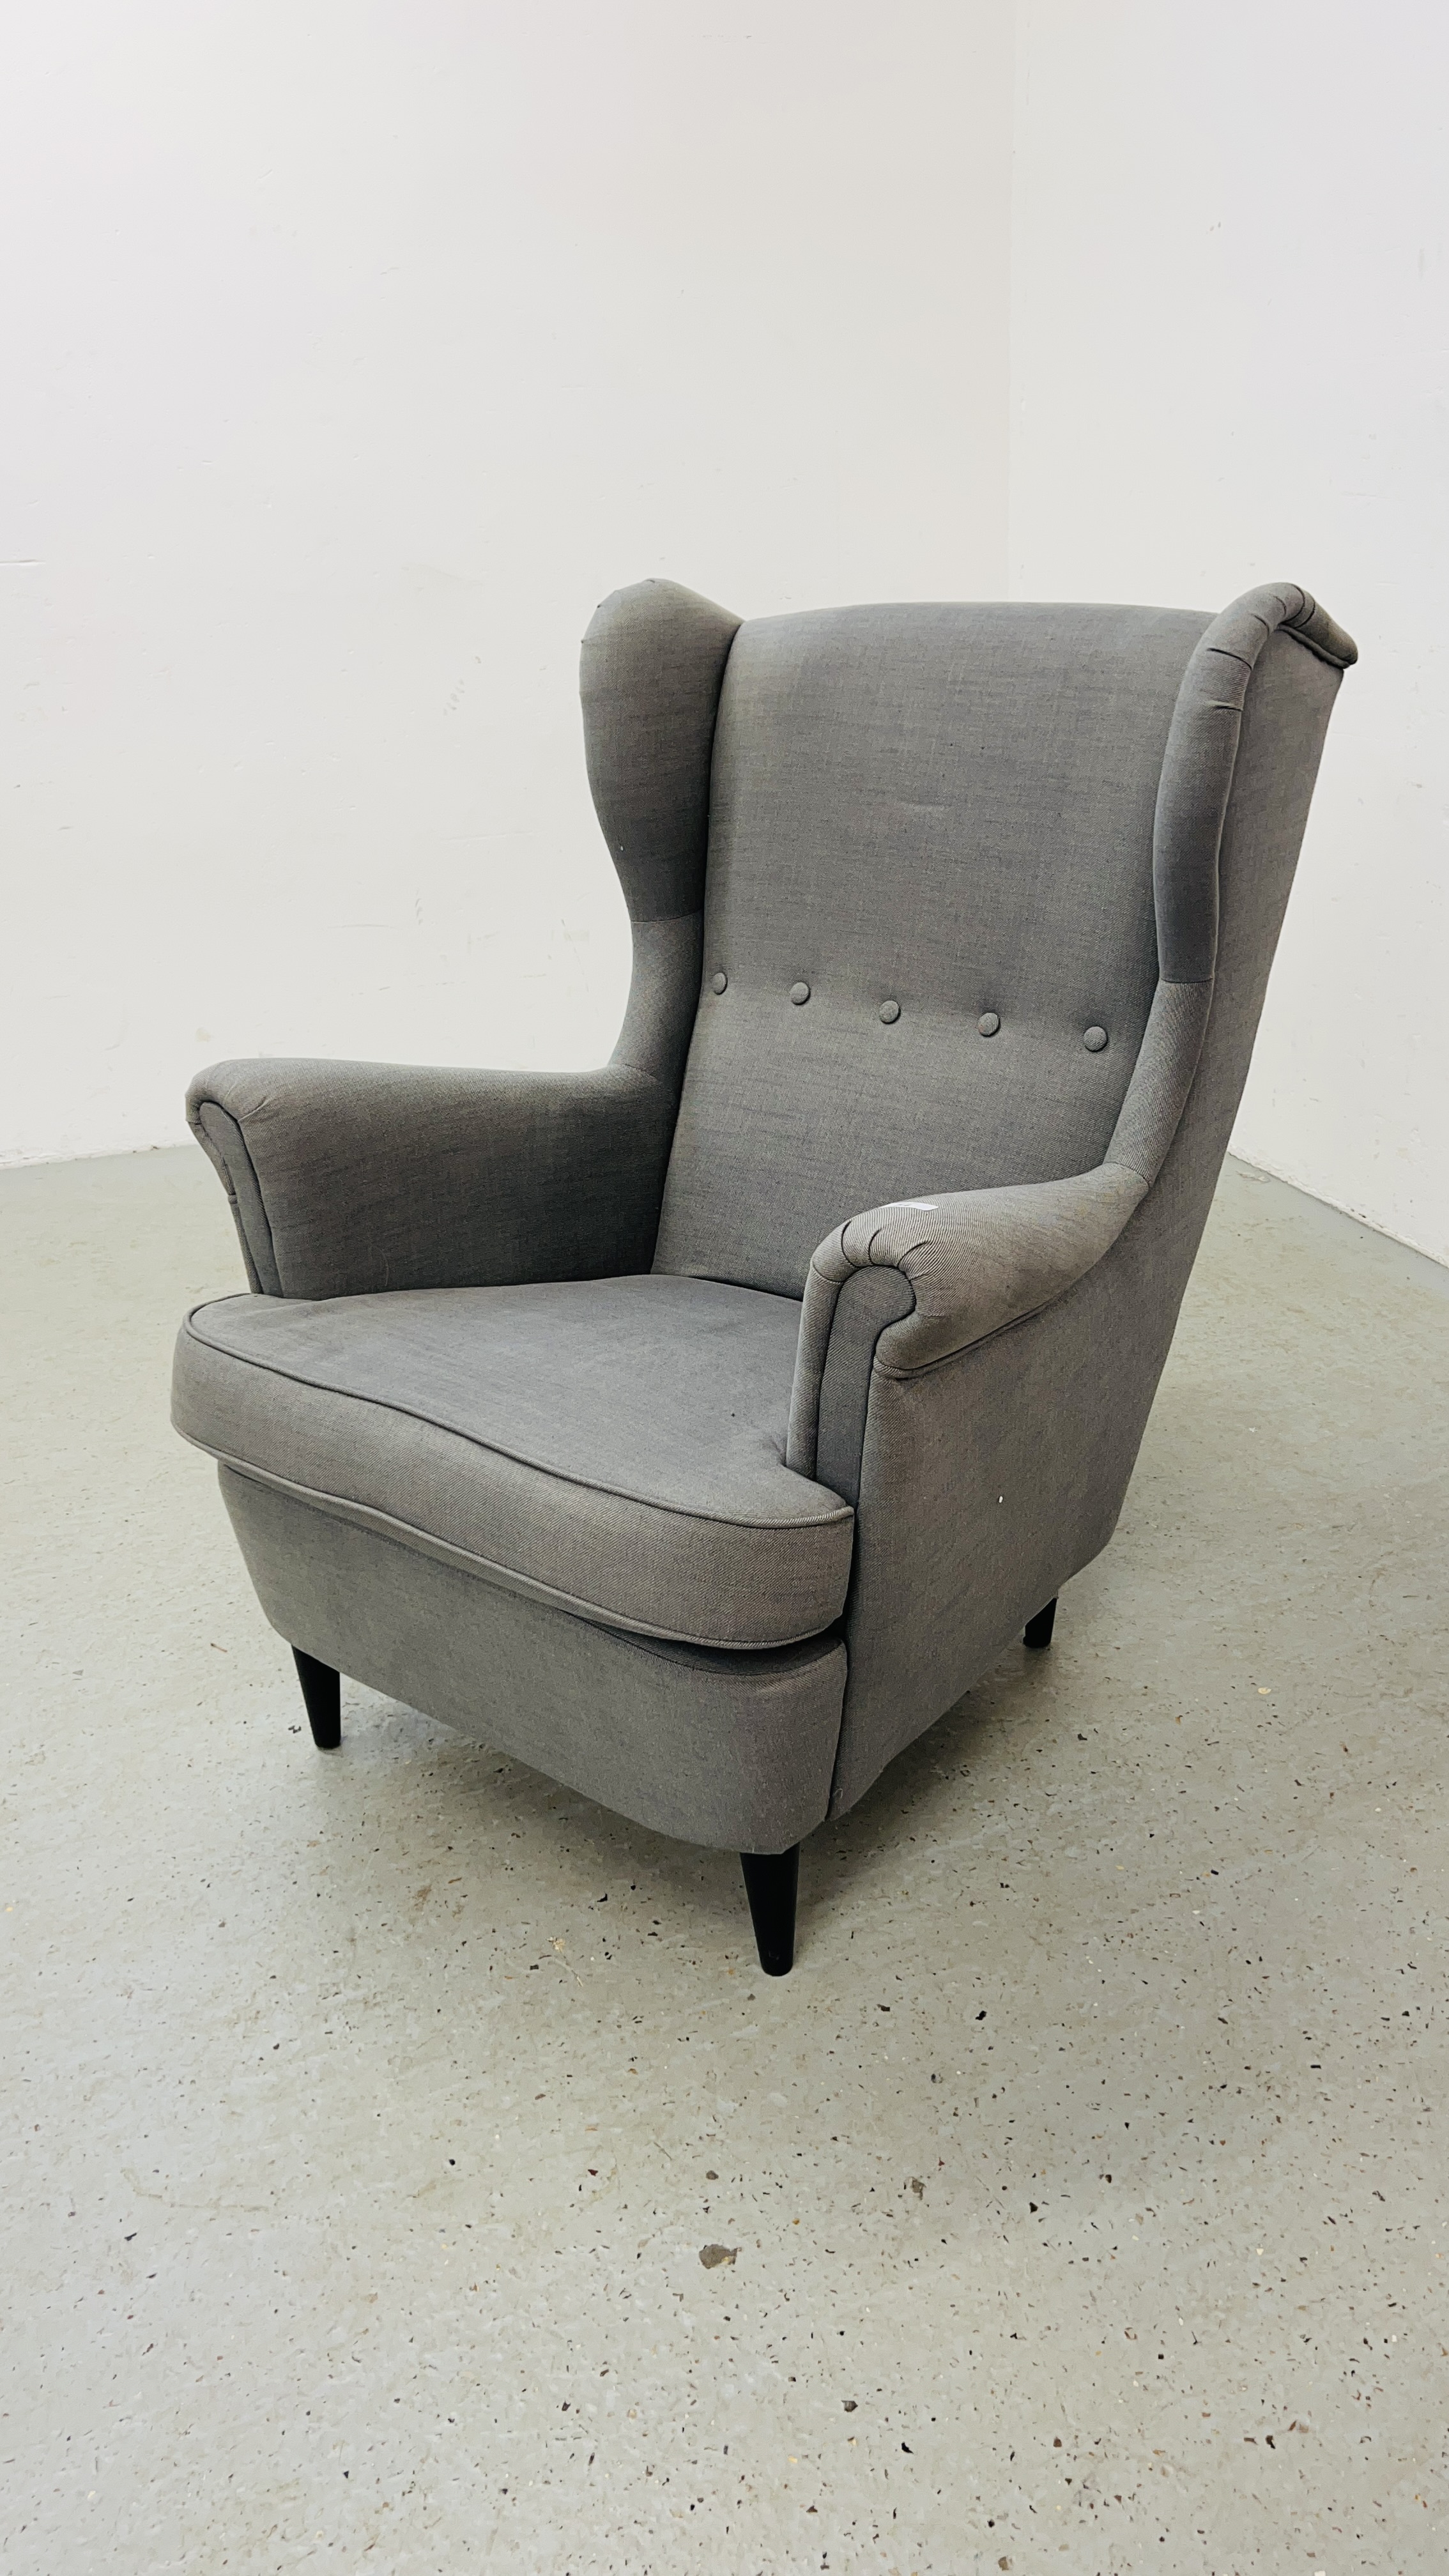 A MODERN IKEA DESIGNER WINGED ARM CHAIR GREY UPHOLSTERED. - Image 5 of 5